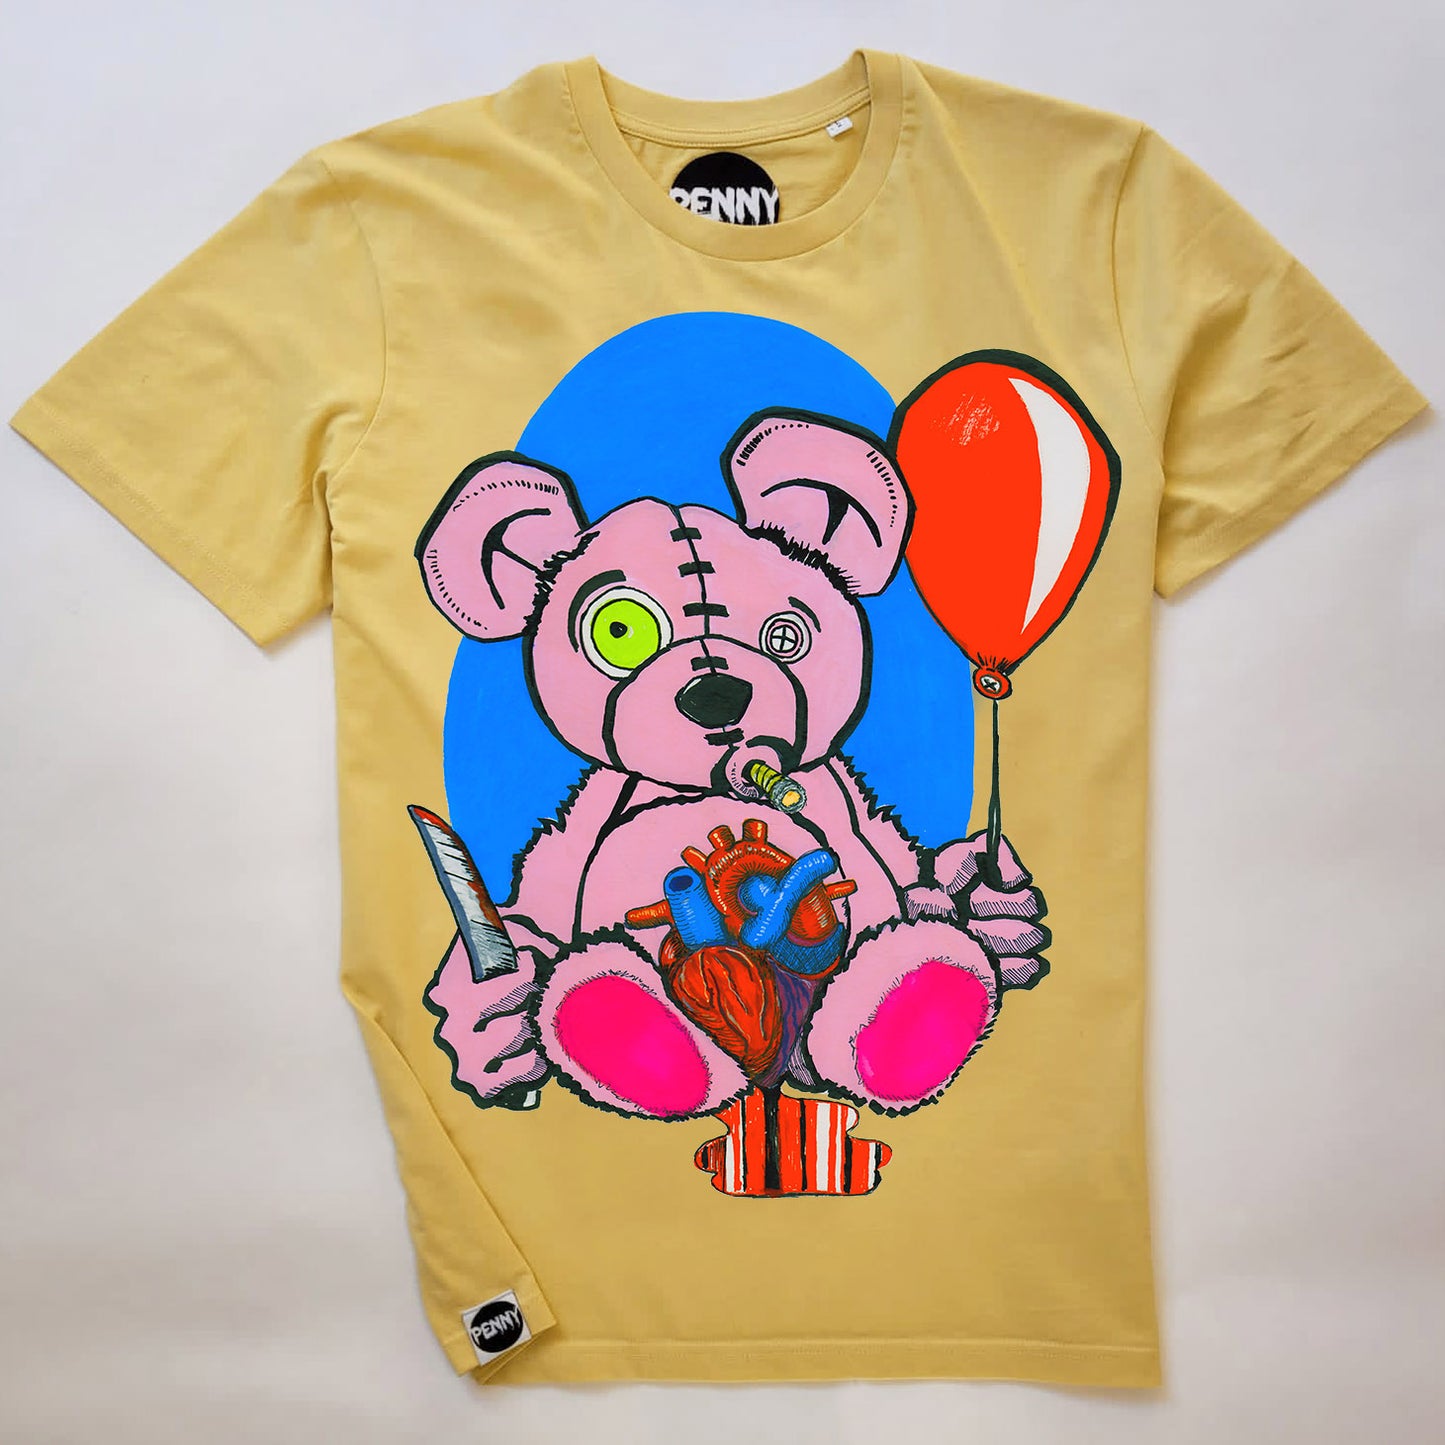 Bad Ted Heart T-shirt